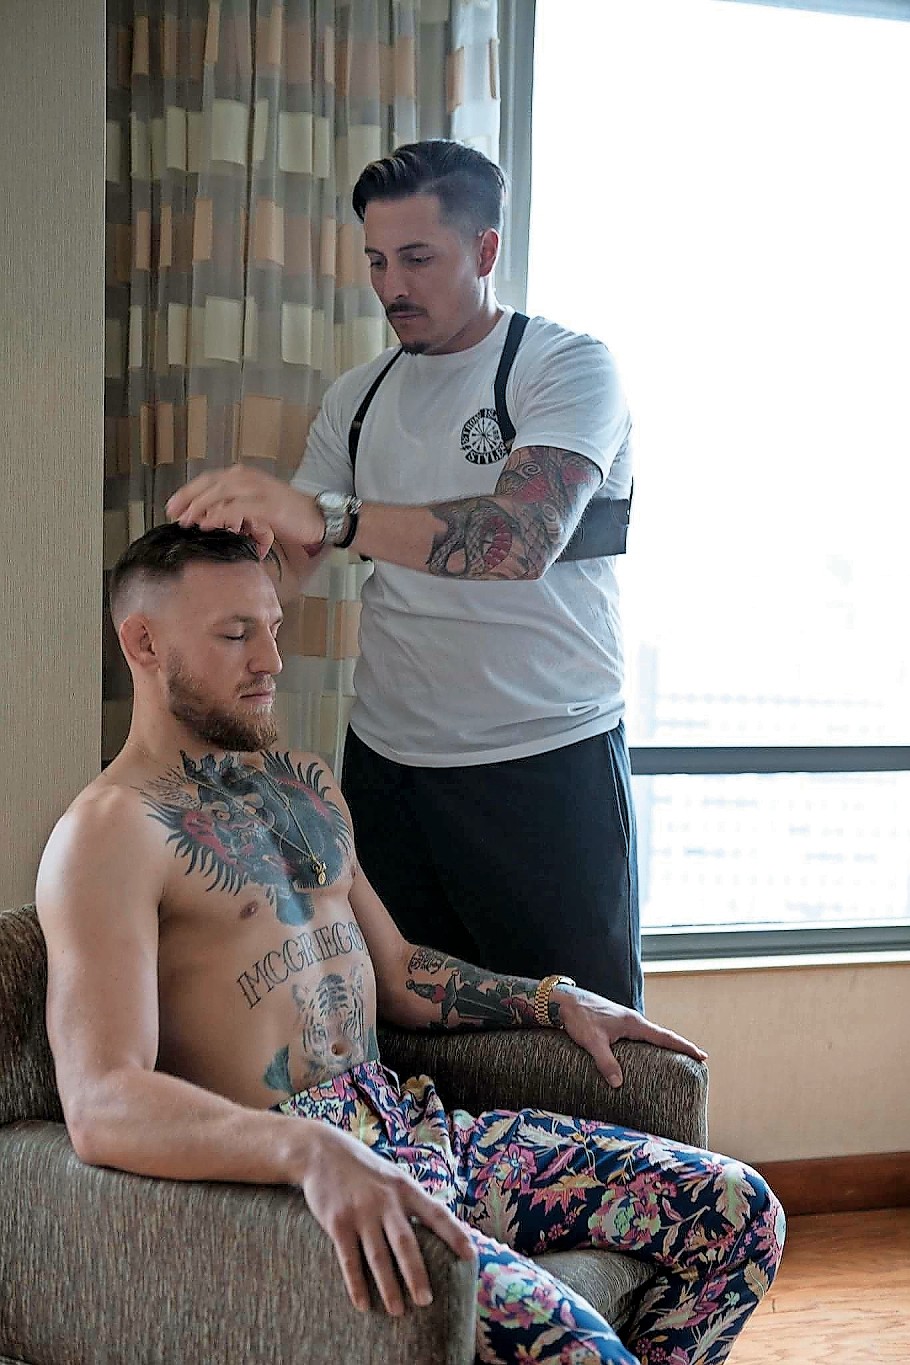 Conor McGregor Haircut | McGregor may have gone for the shaved head for the  Mayweather fight but here's how to get his usual smart side parting fade  haircut.. | By Regal GentlemanFacebook